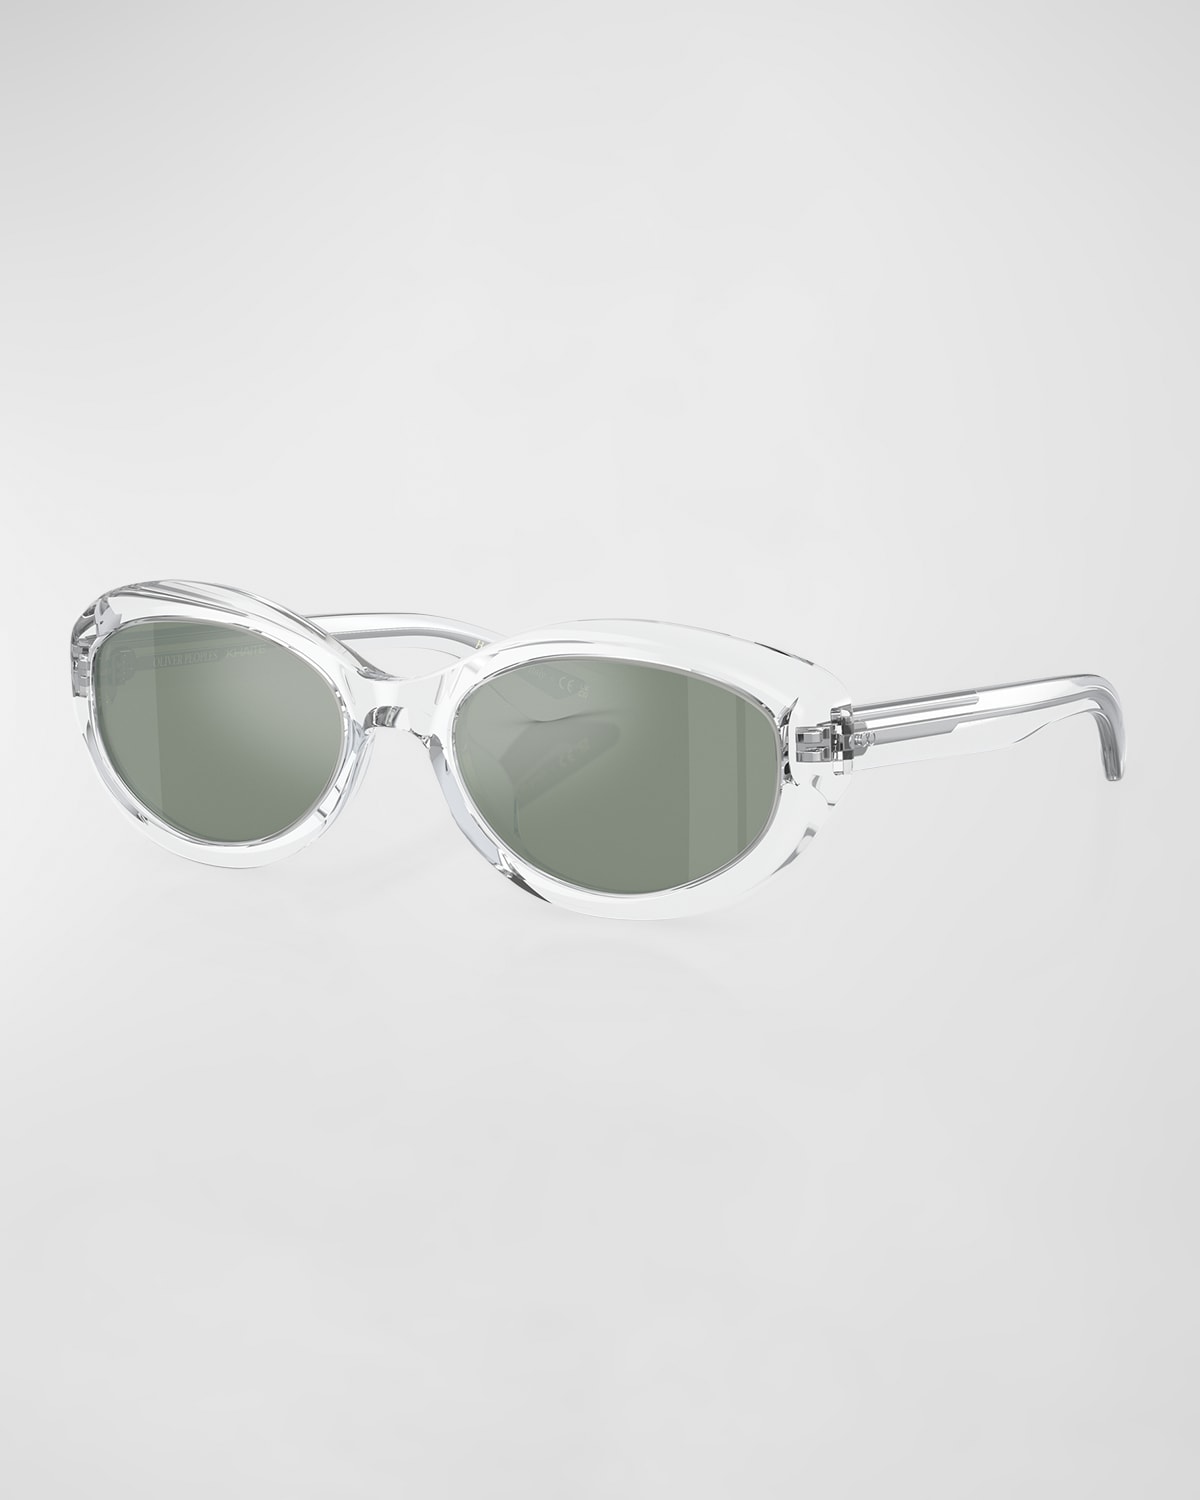 Khaite X Oliver Peoples Women's Oliver Peoples 53mm Oval Sunglasses In Crystal